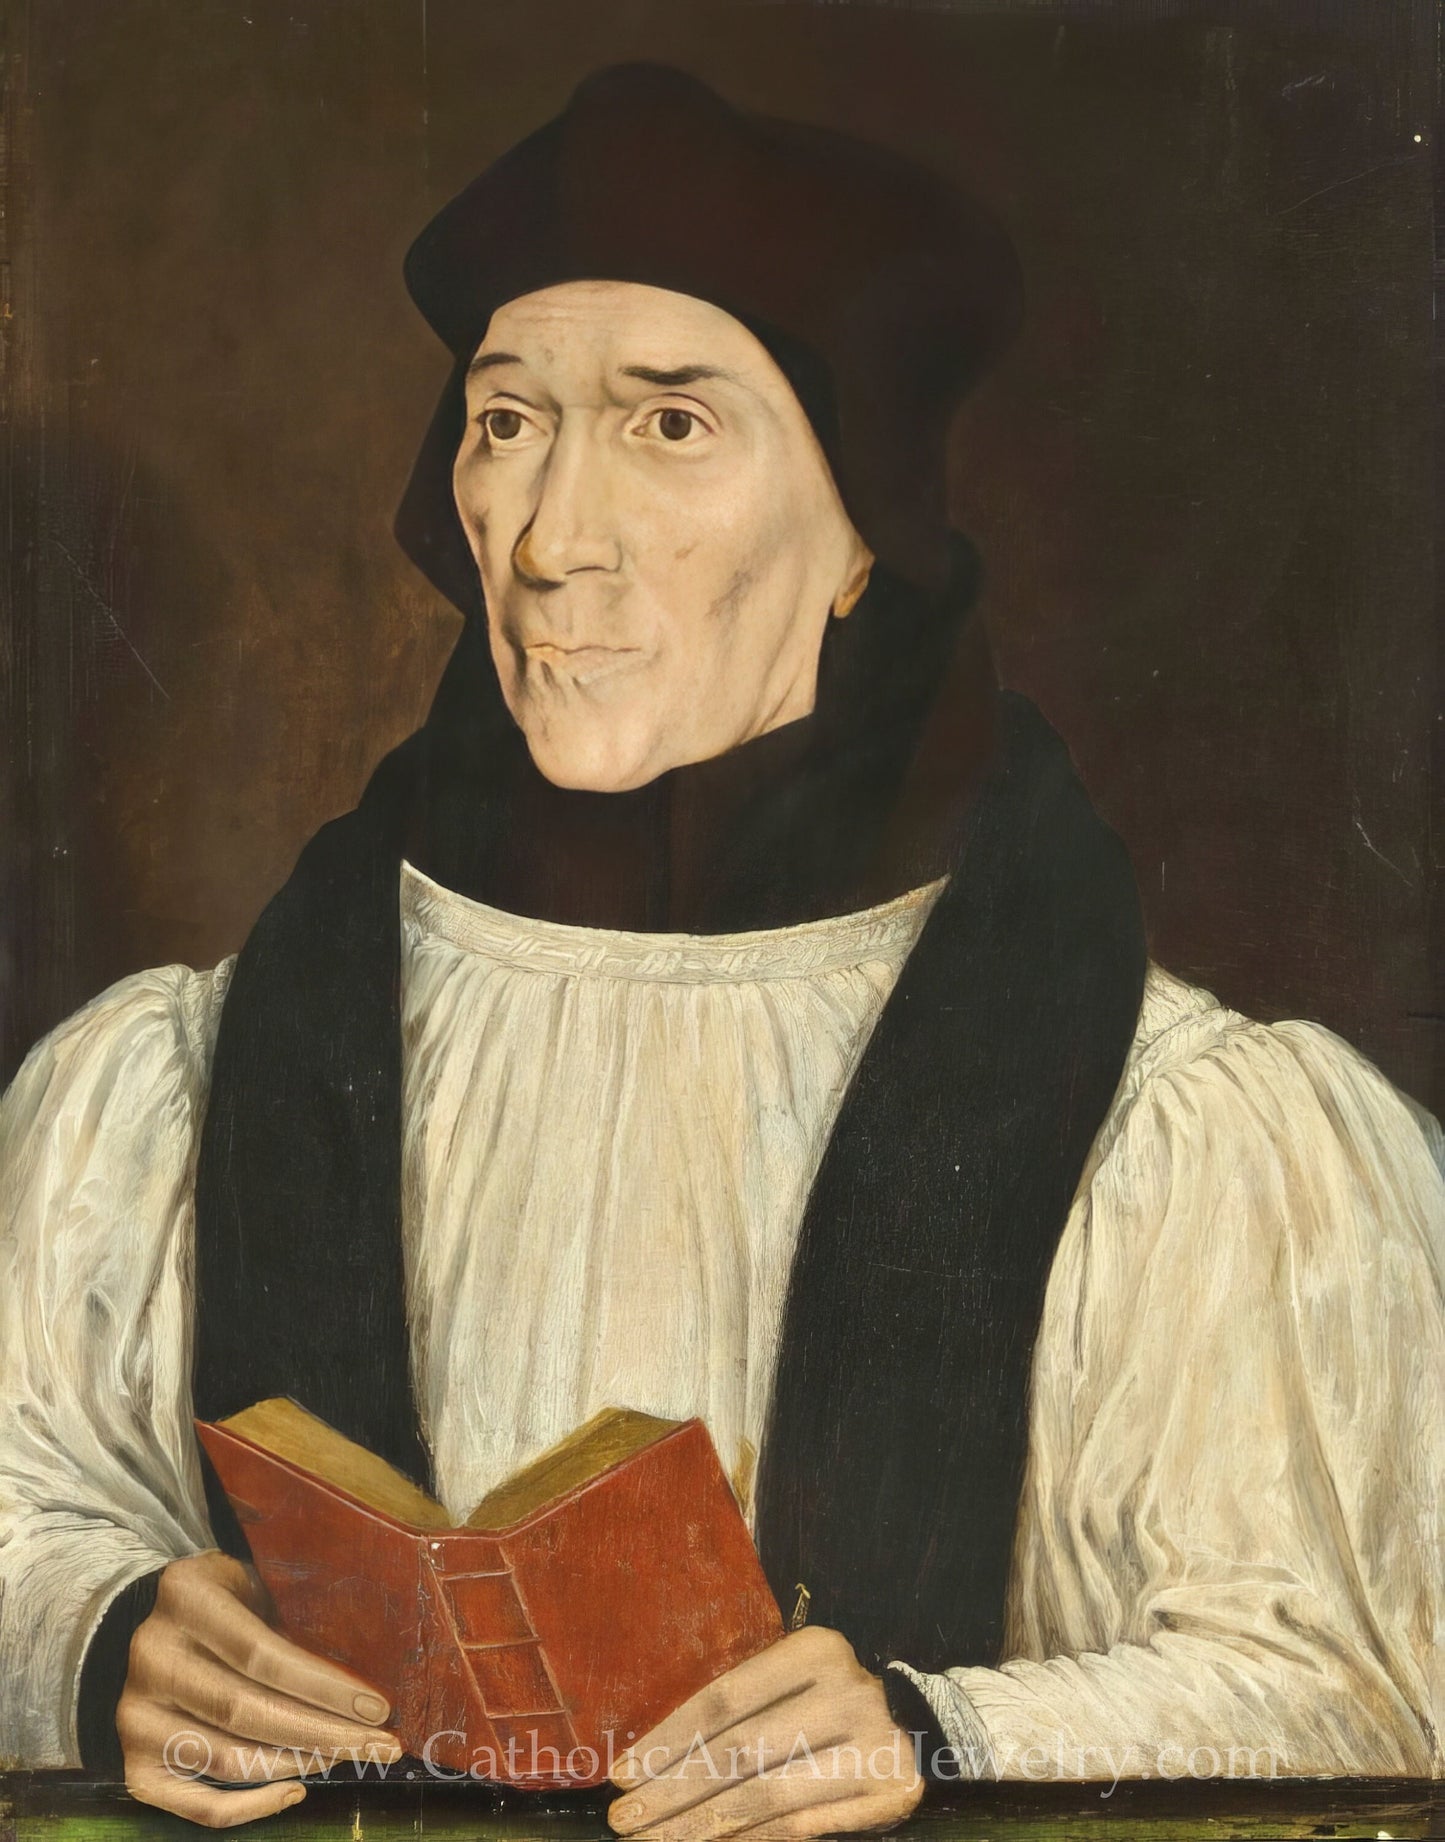 New! St. John Fisher, Bishop and Martyr – Portrait – Catholic Art – Archival Quality